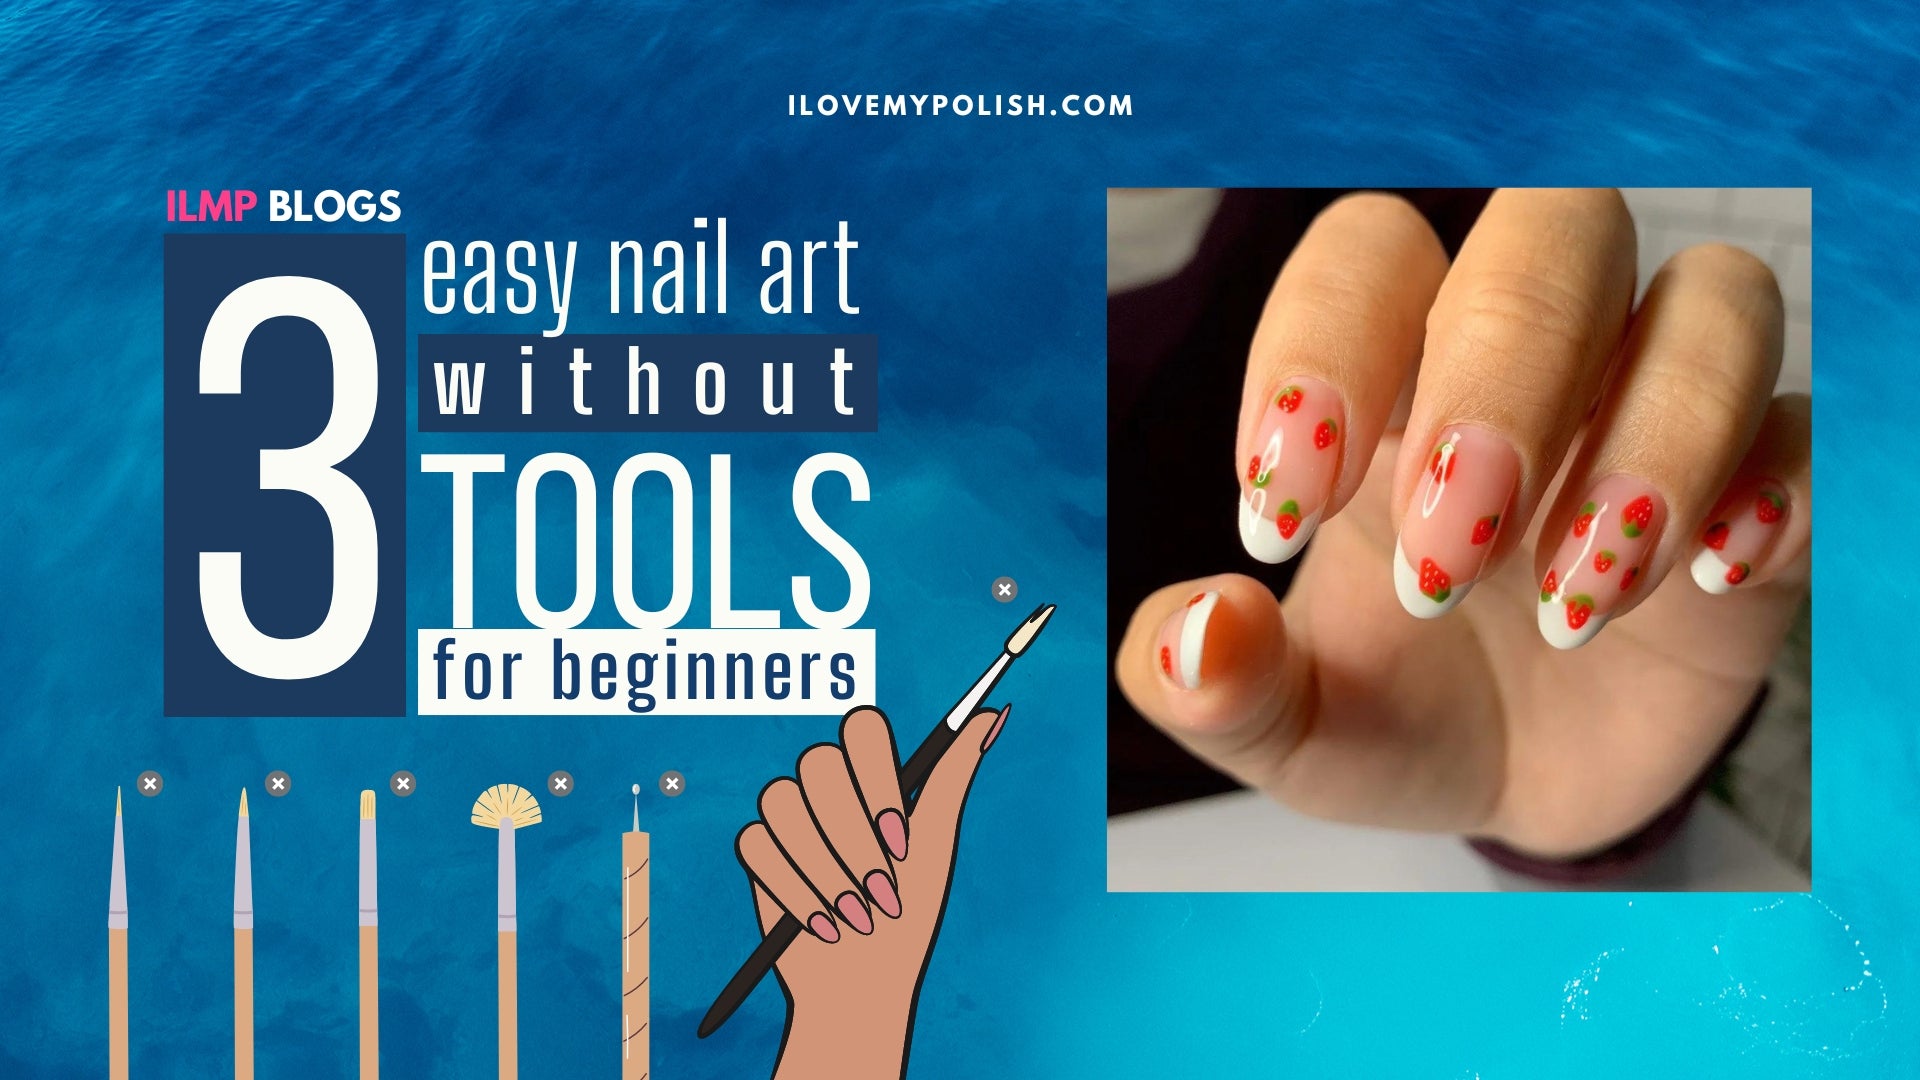 10 Easy Nail Art Designs for Beginners: The Ultimate Guide! - YouTube